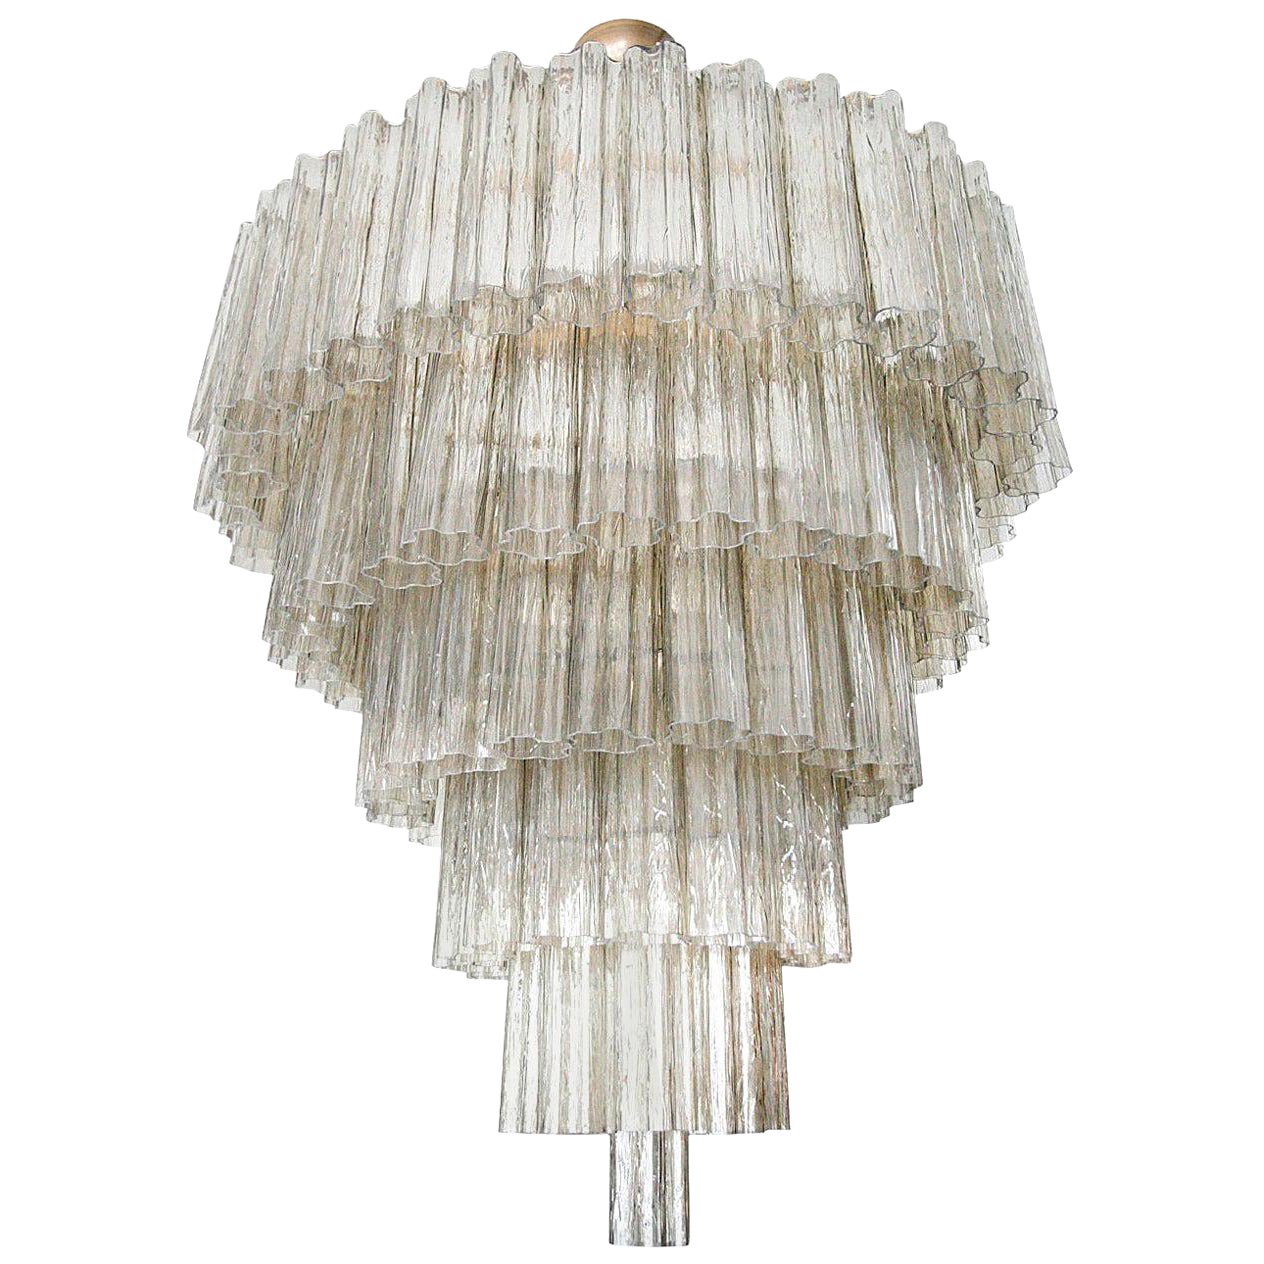 Tiered 1970s Smoked Glass Murano Chandelier For Sale